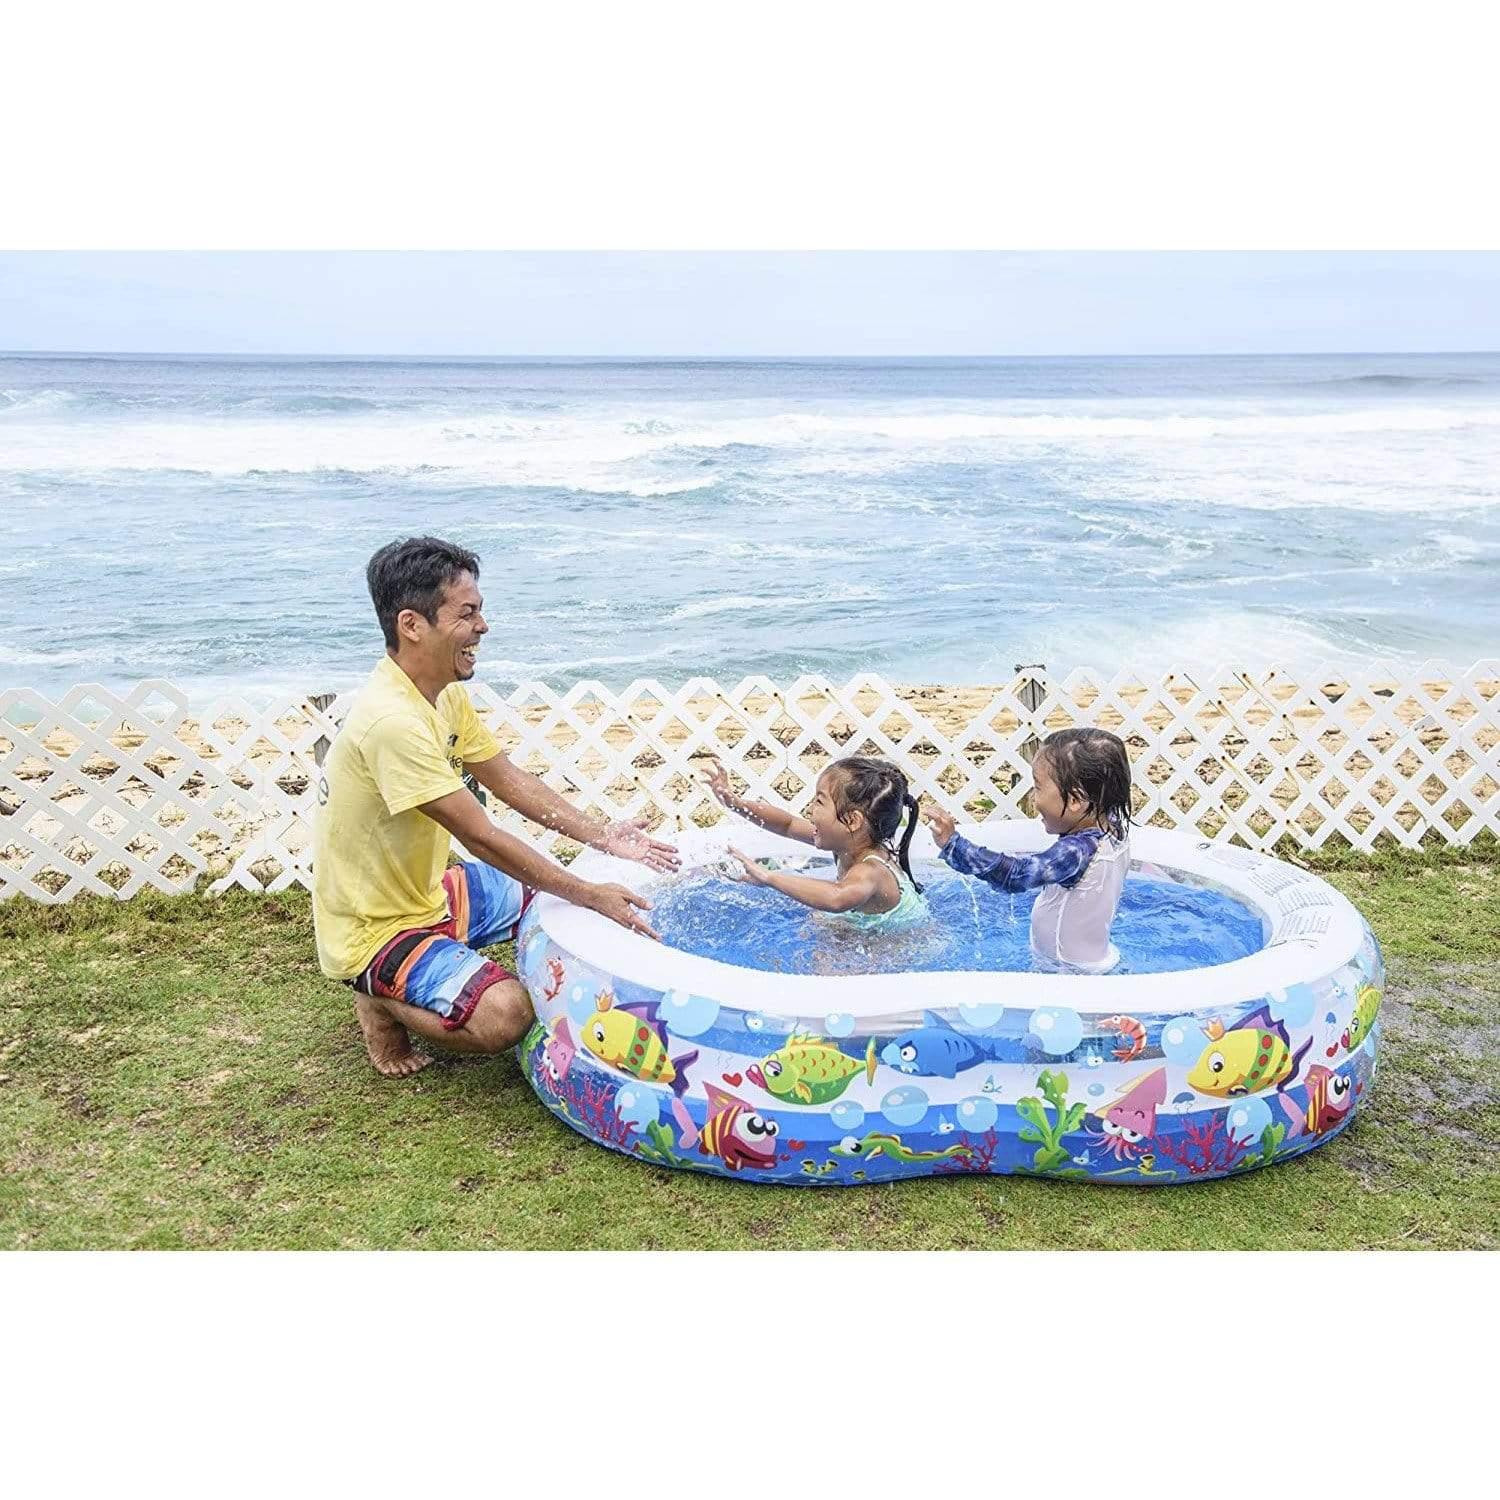 Jilong Figure 8 Pool - Large Children's Pool with Fun Sea Animals Print, for Children from 6 Years, 175X109 cm